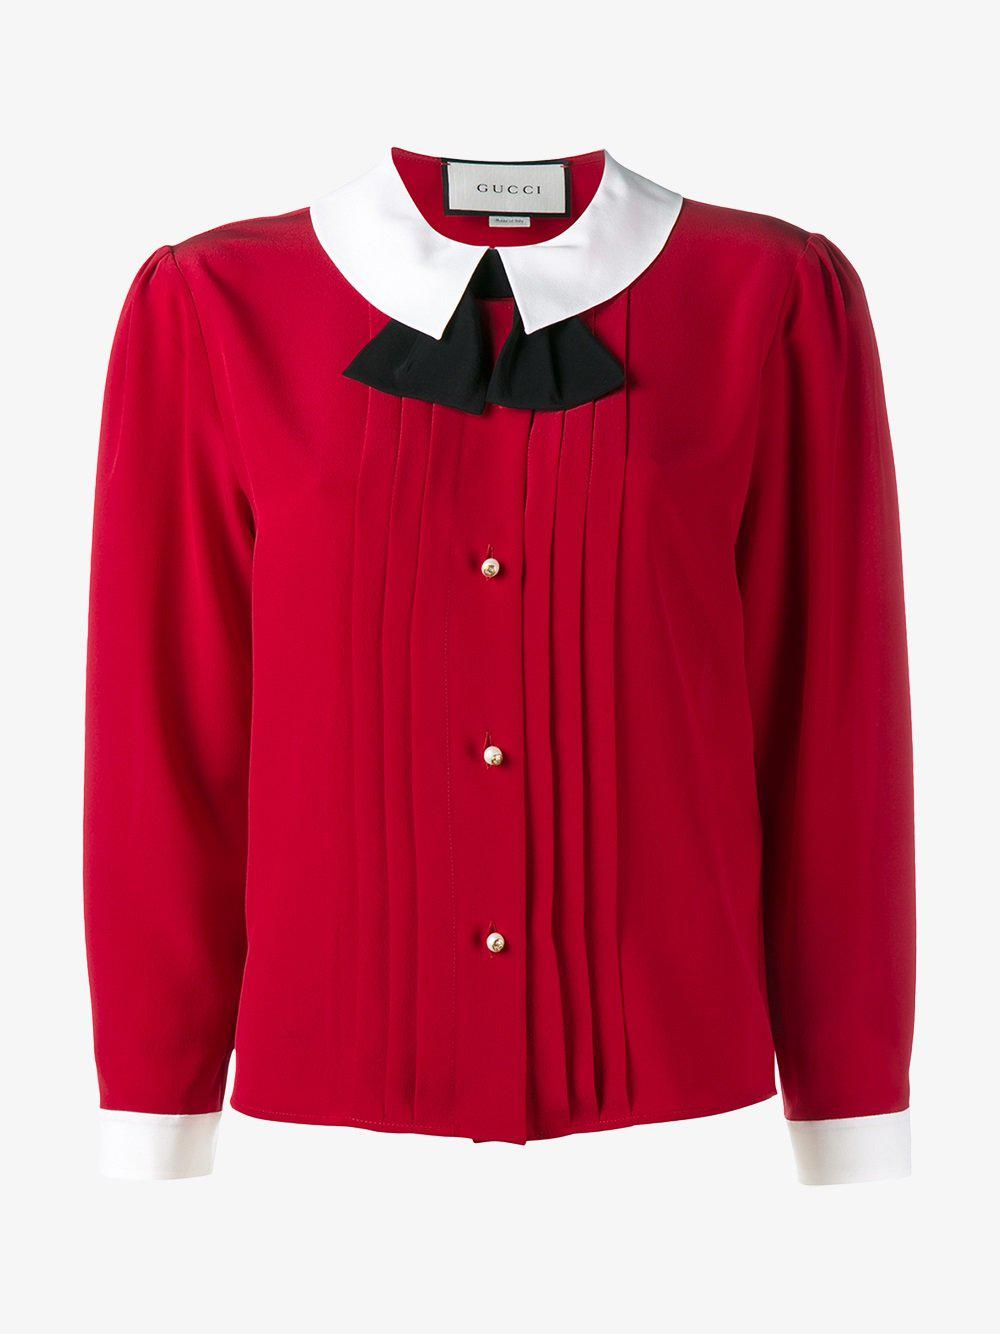 Lyst - Gucci Peter Pan Collar Blouse in Red